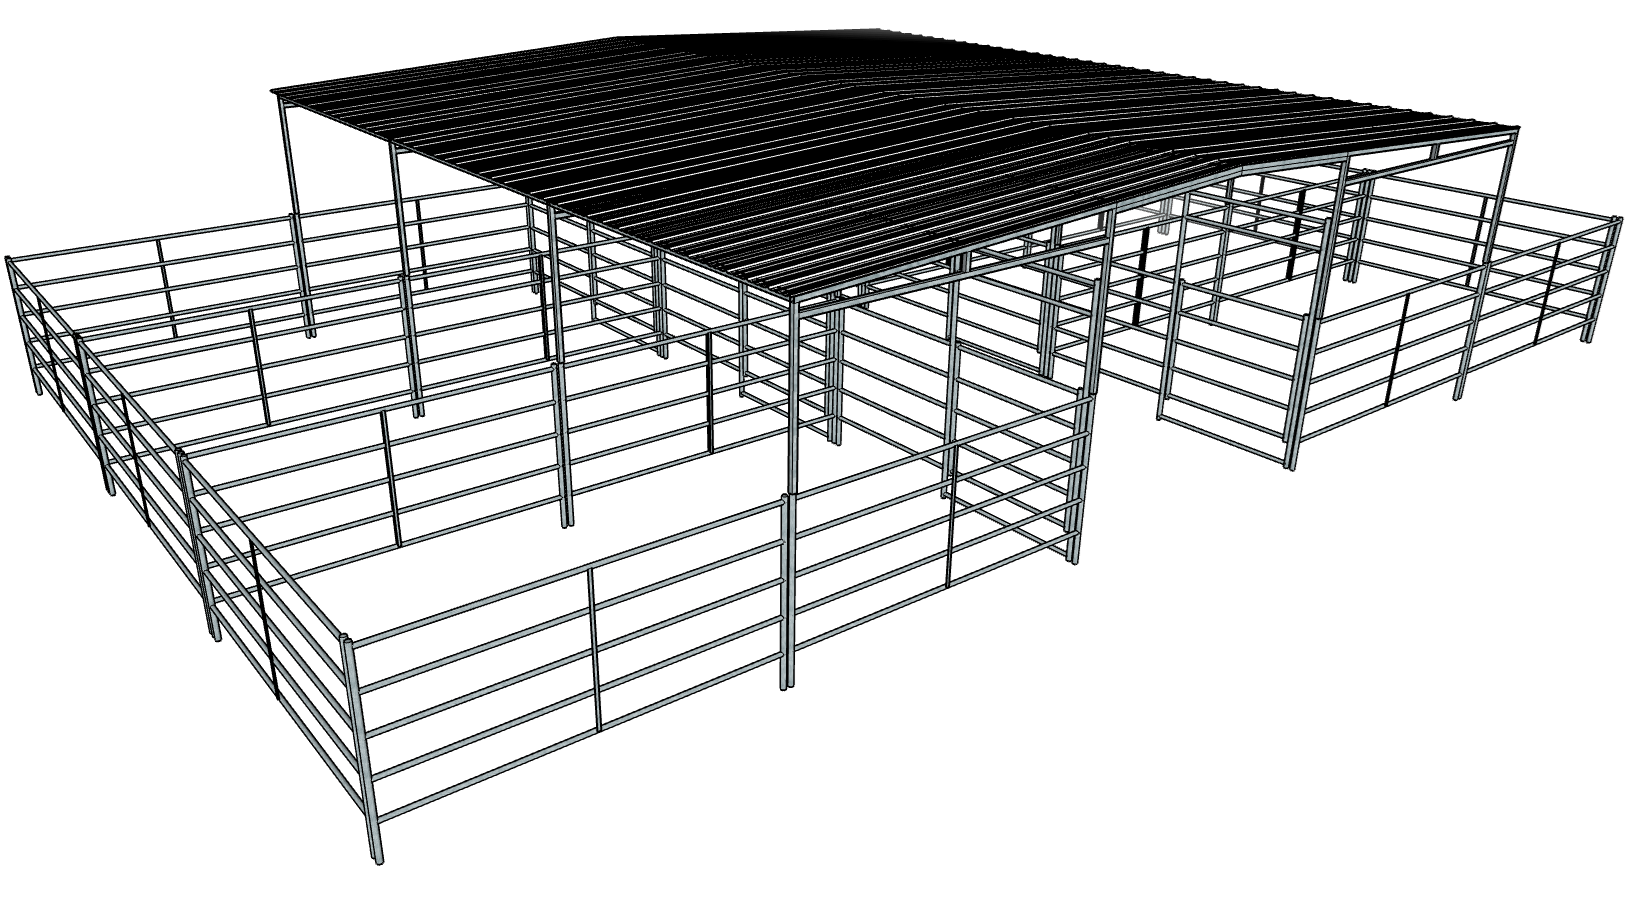 50 Ft X 30 Ft 5-Rail 6 Stall Barn Kit with 30 Ft by 30 Ft Gable Roof